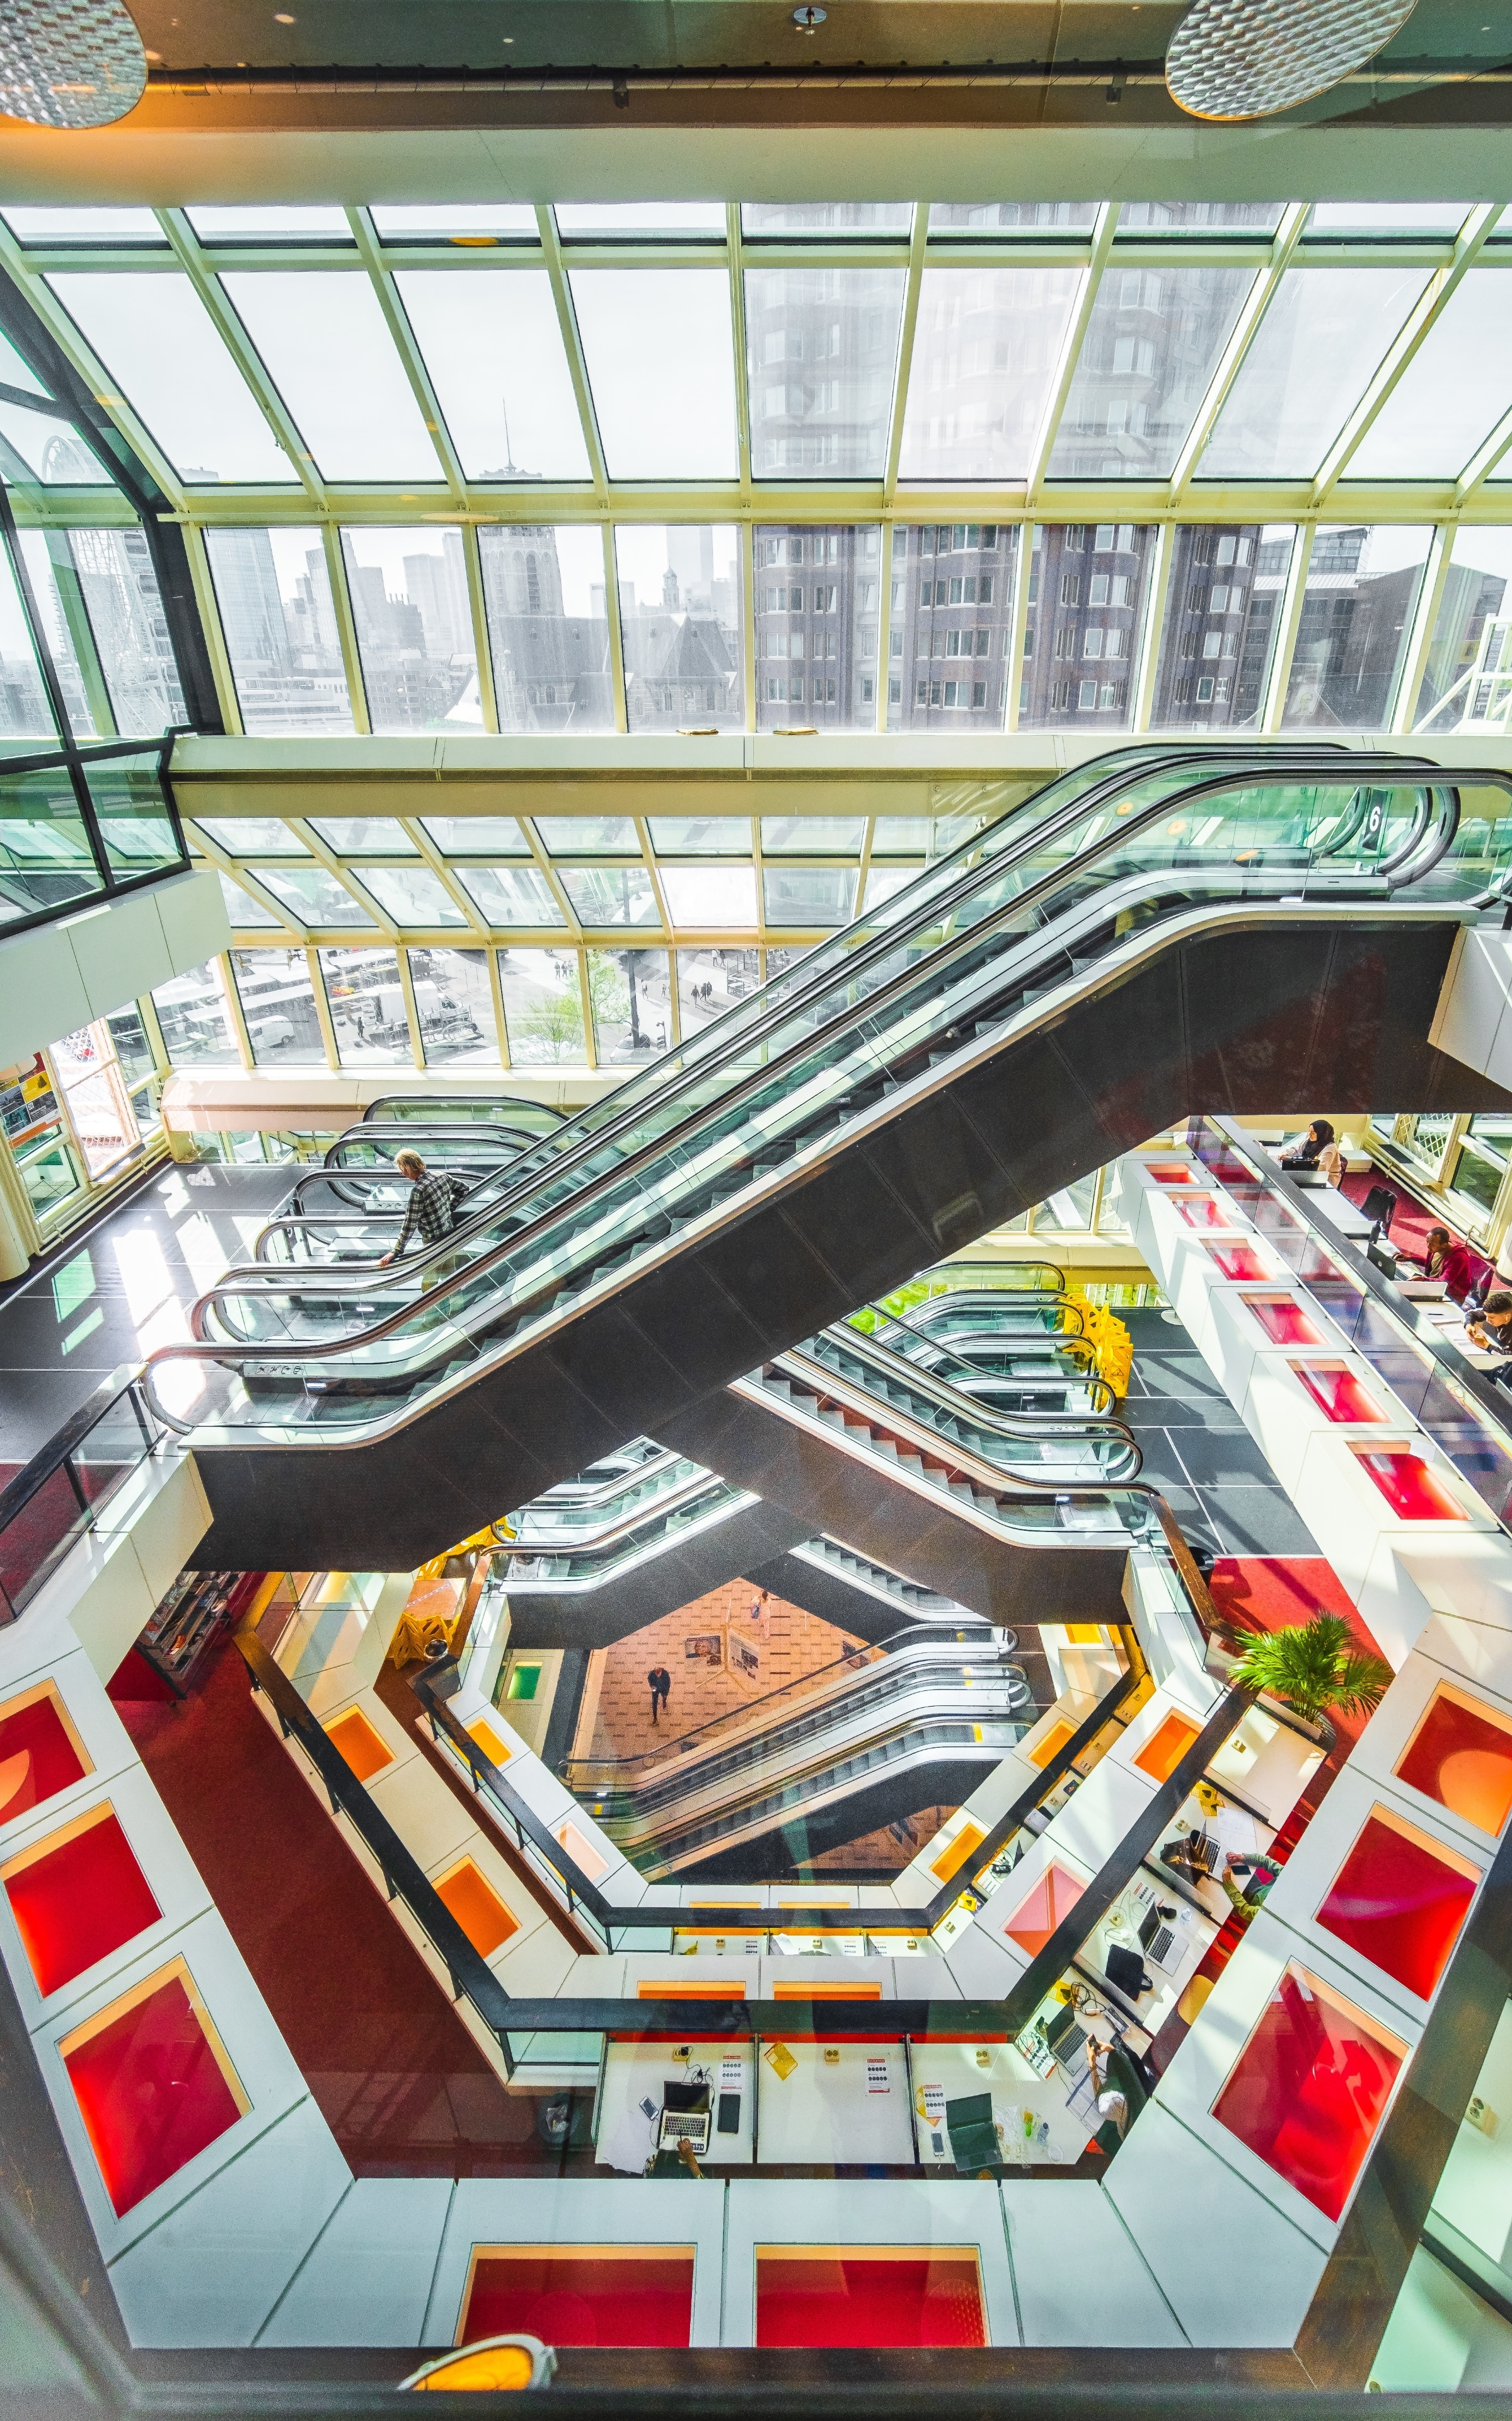 The Rotterdam Central Library, designed and built by the architectural office of Van den Broek en Bakema, was completed in 1983 and features a great bright atrium. Located right next to the Markthal and the Cube houses !